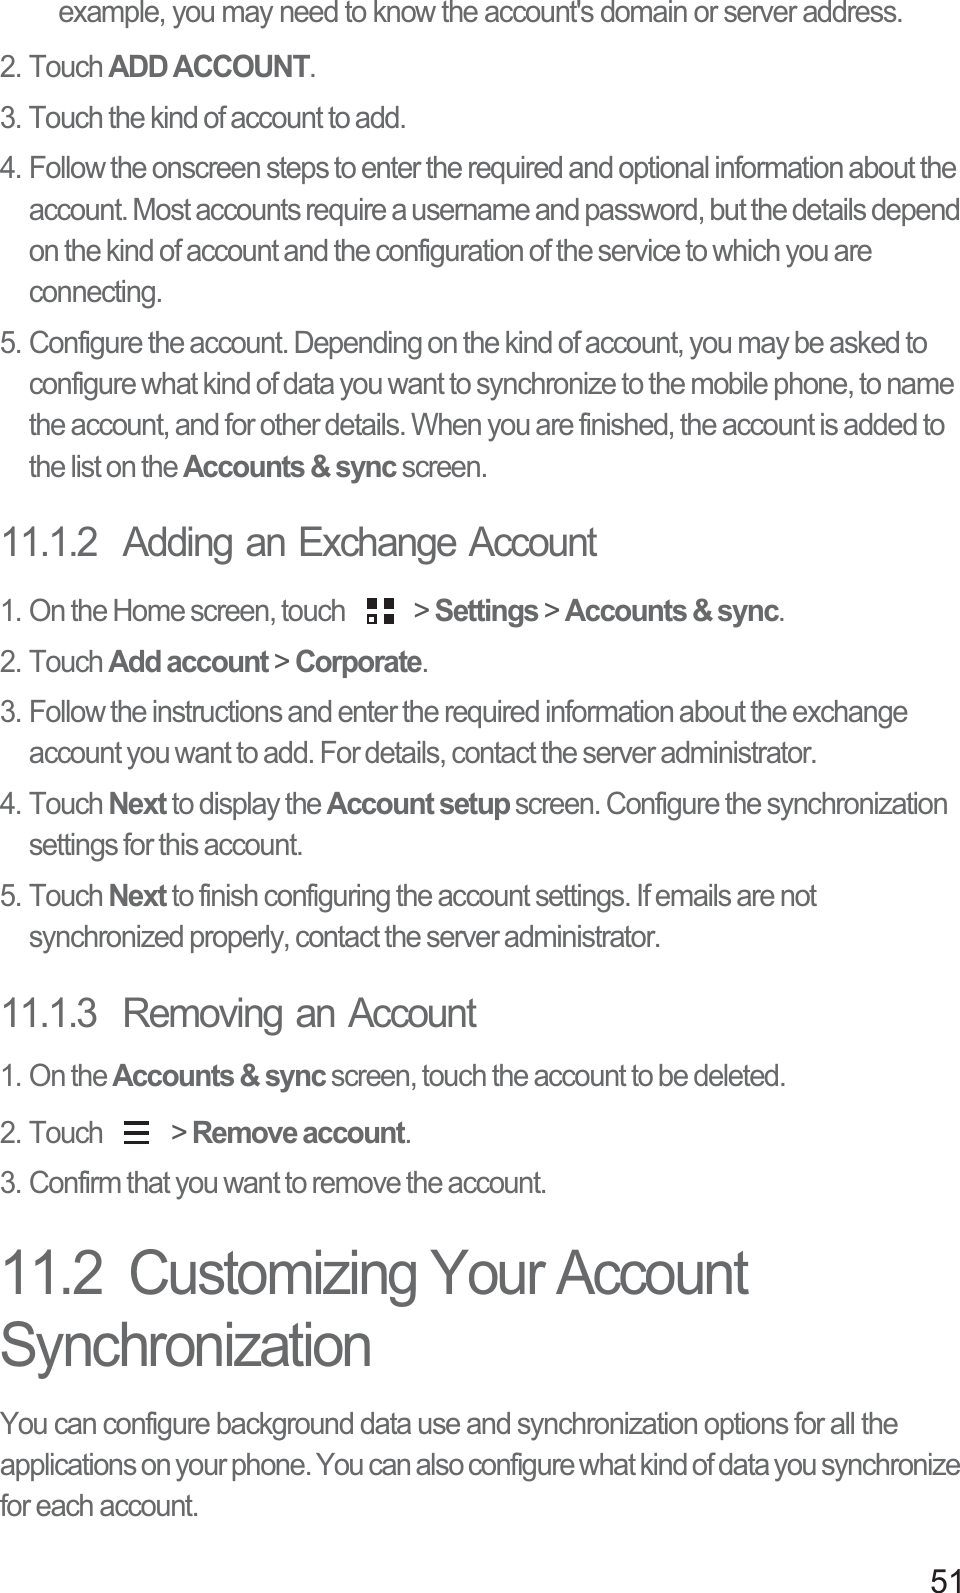 51example, you may need to know the account&apos;s domain or server address.2. Touch ADD ACCOUNT.3. Touch the kind of account to add.4. Follow the onscreen steps to enter the required and optional information about the account. Most accounts require a username and password, but the details depend on the kind of account and the configuration of the service to which you are connecting.5. Configure the account. Depending on the kind of account, you may be asked to configure what kind of data you want to synchronize to the mobile phone, to name the account, and for other details. When you are finished, the account is added to the list on the Accounts &amp; sync screen.11.1.2  Adding an Exchange Account1. On the Home screen, touch   &gt; Settings &gt; Accounts &amp; sync.2. Touch Add account &gt; Corporate.3. Follow the instructions and enter the required information about the exchange account you want to add. For details, contact the server administrator.4. Touch Next to display the Account setup screen. Configure the synchronization settings for this account.5. Touch Next to finish configuring the account settings. If emails are not synchronized properly, contact the server administrator.11.1.3  Removing an Account1. On the Accounts &amp; sync screen, touch the account to be deleted.2. Touch   &gt; Remove account.3. Confirm that you want to remove the account.11.2  Customizing Your Account SynchronizationYou can configure background data use and synchronization options for all the applications on your phone. You can also configure what kind of data you synchronize for each account.